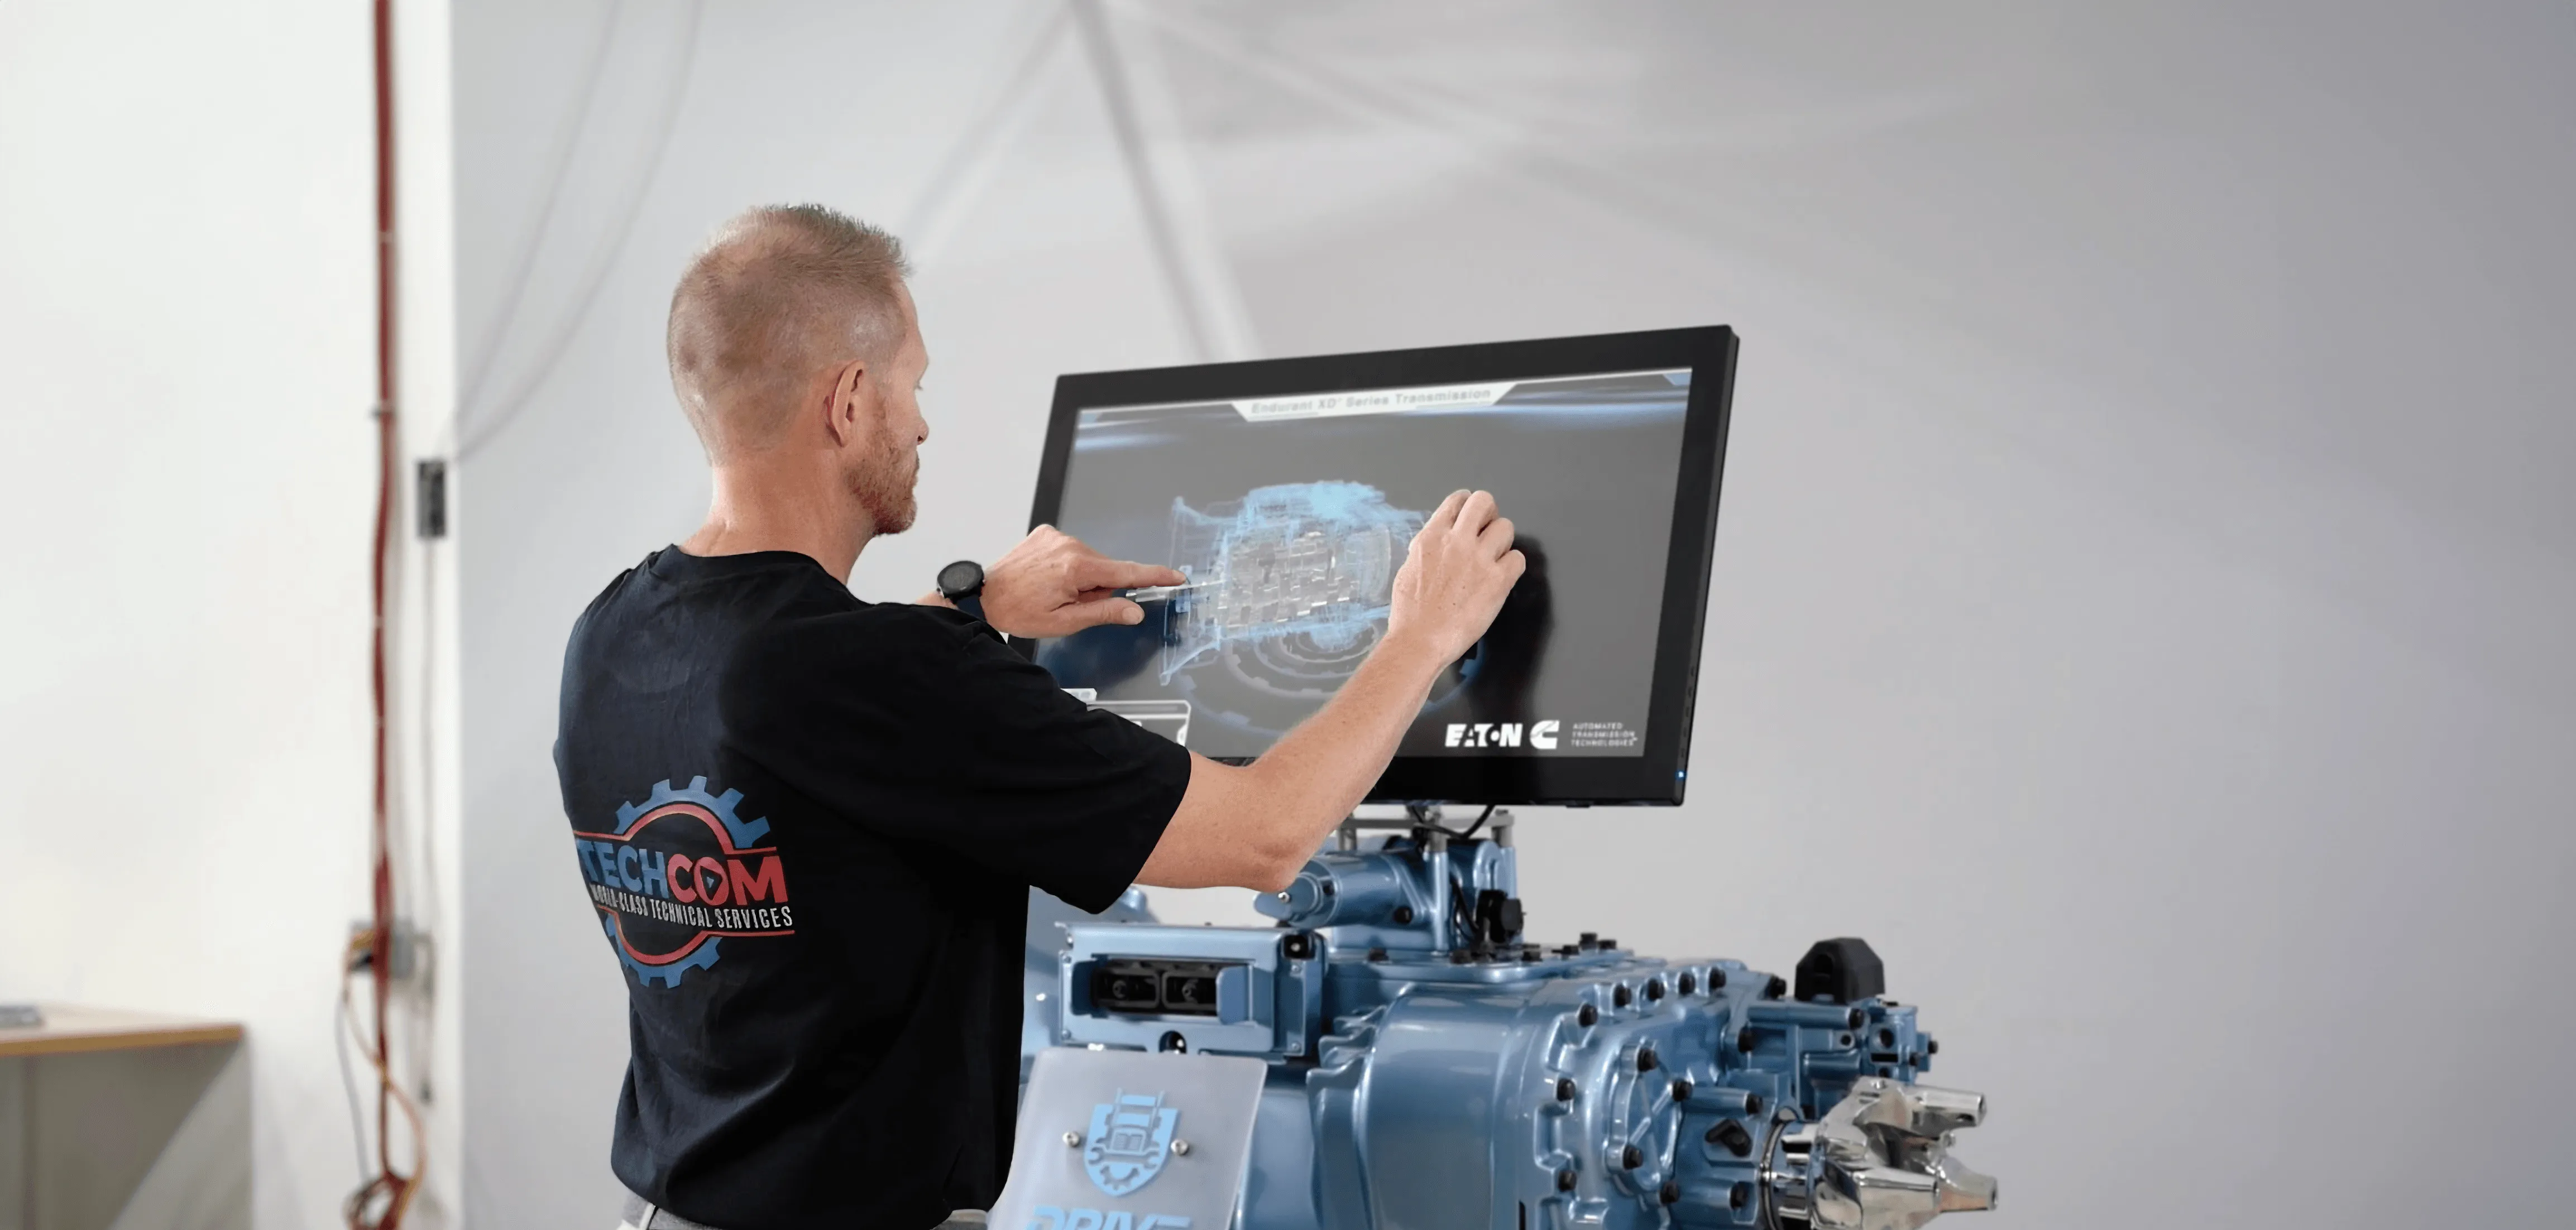 A technician interacting with a digital touchscreen displaying a 3D model of a transmission system with an actual engine component in the foreground.